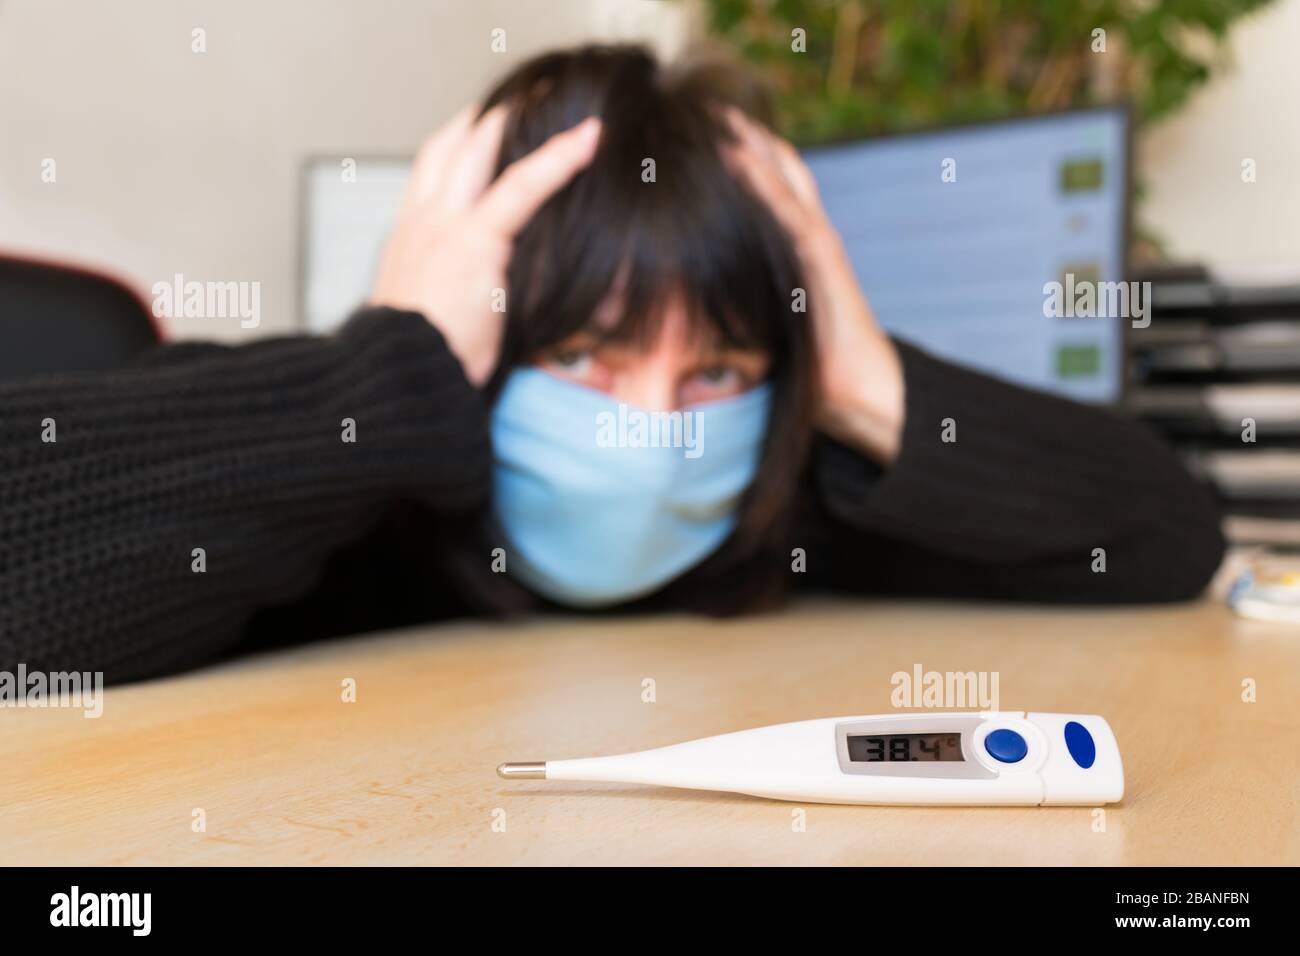 Covid-19 outbreak. Sick woman with headache and fever. Home quarantine. High temperature on medical thermometer. Fear of pandemic coronavirus disease. Stock Photo